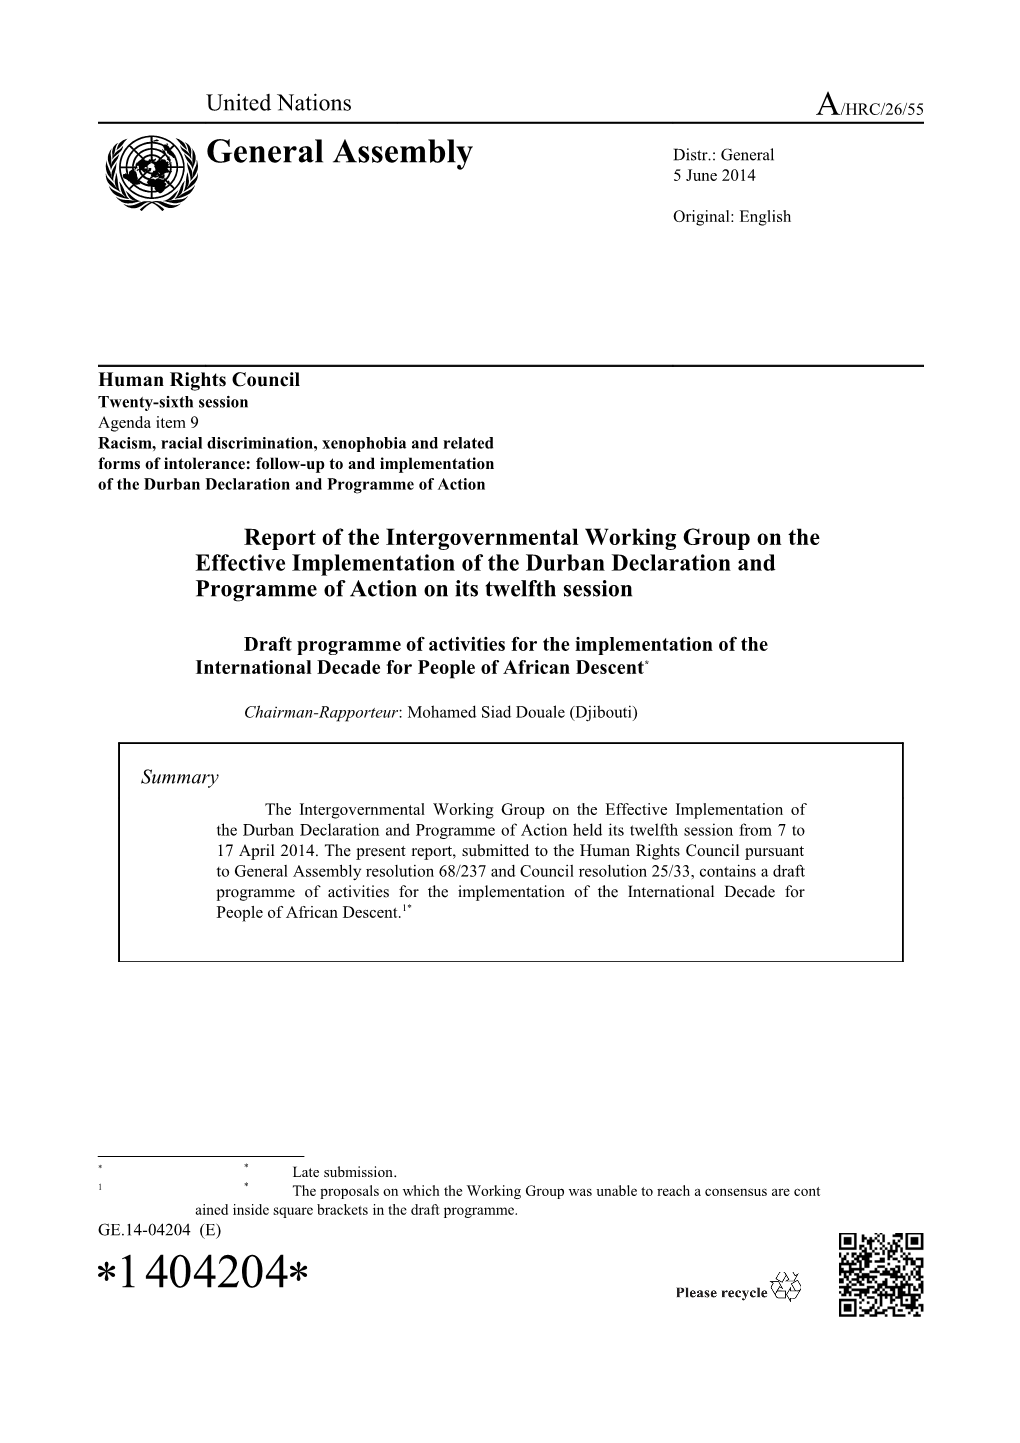 Report of the Intergovernmental Working Group on the Effective Implementation of the Durban